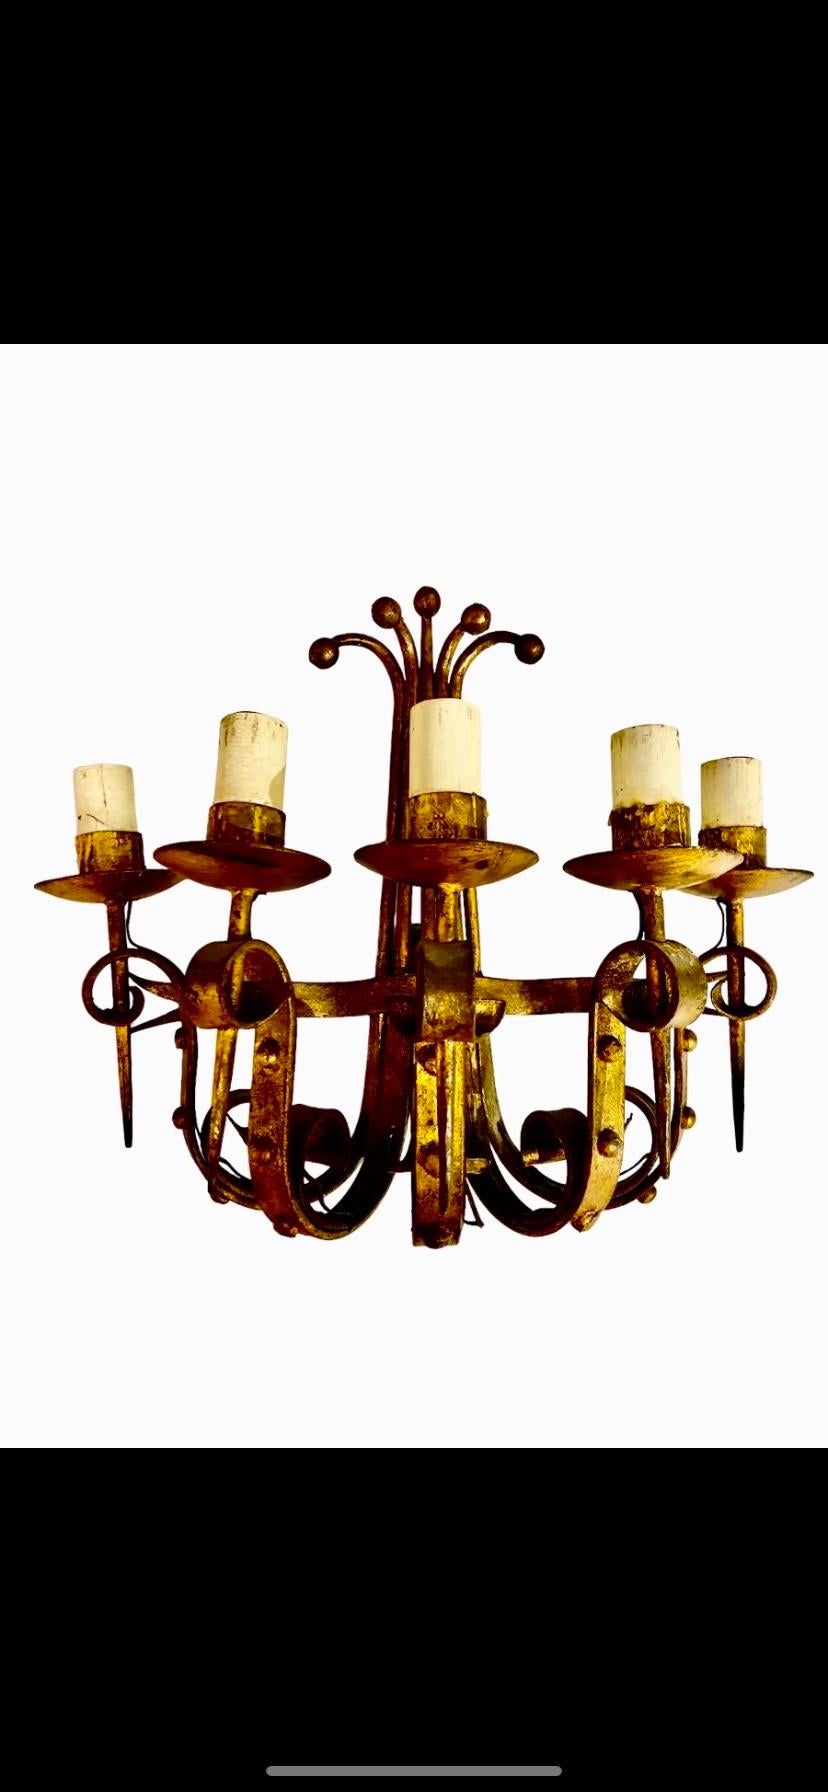 Wonderful old balears Spain 1950s two light metal wall sconces with 5 bulbs and golden leaves, in a beautiful quirky shape. Traditional handcrafted, Hollywood Regency style. Original iron candle holders. All parts have been cleaned but without